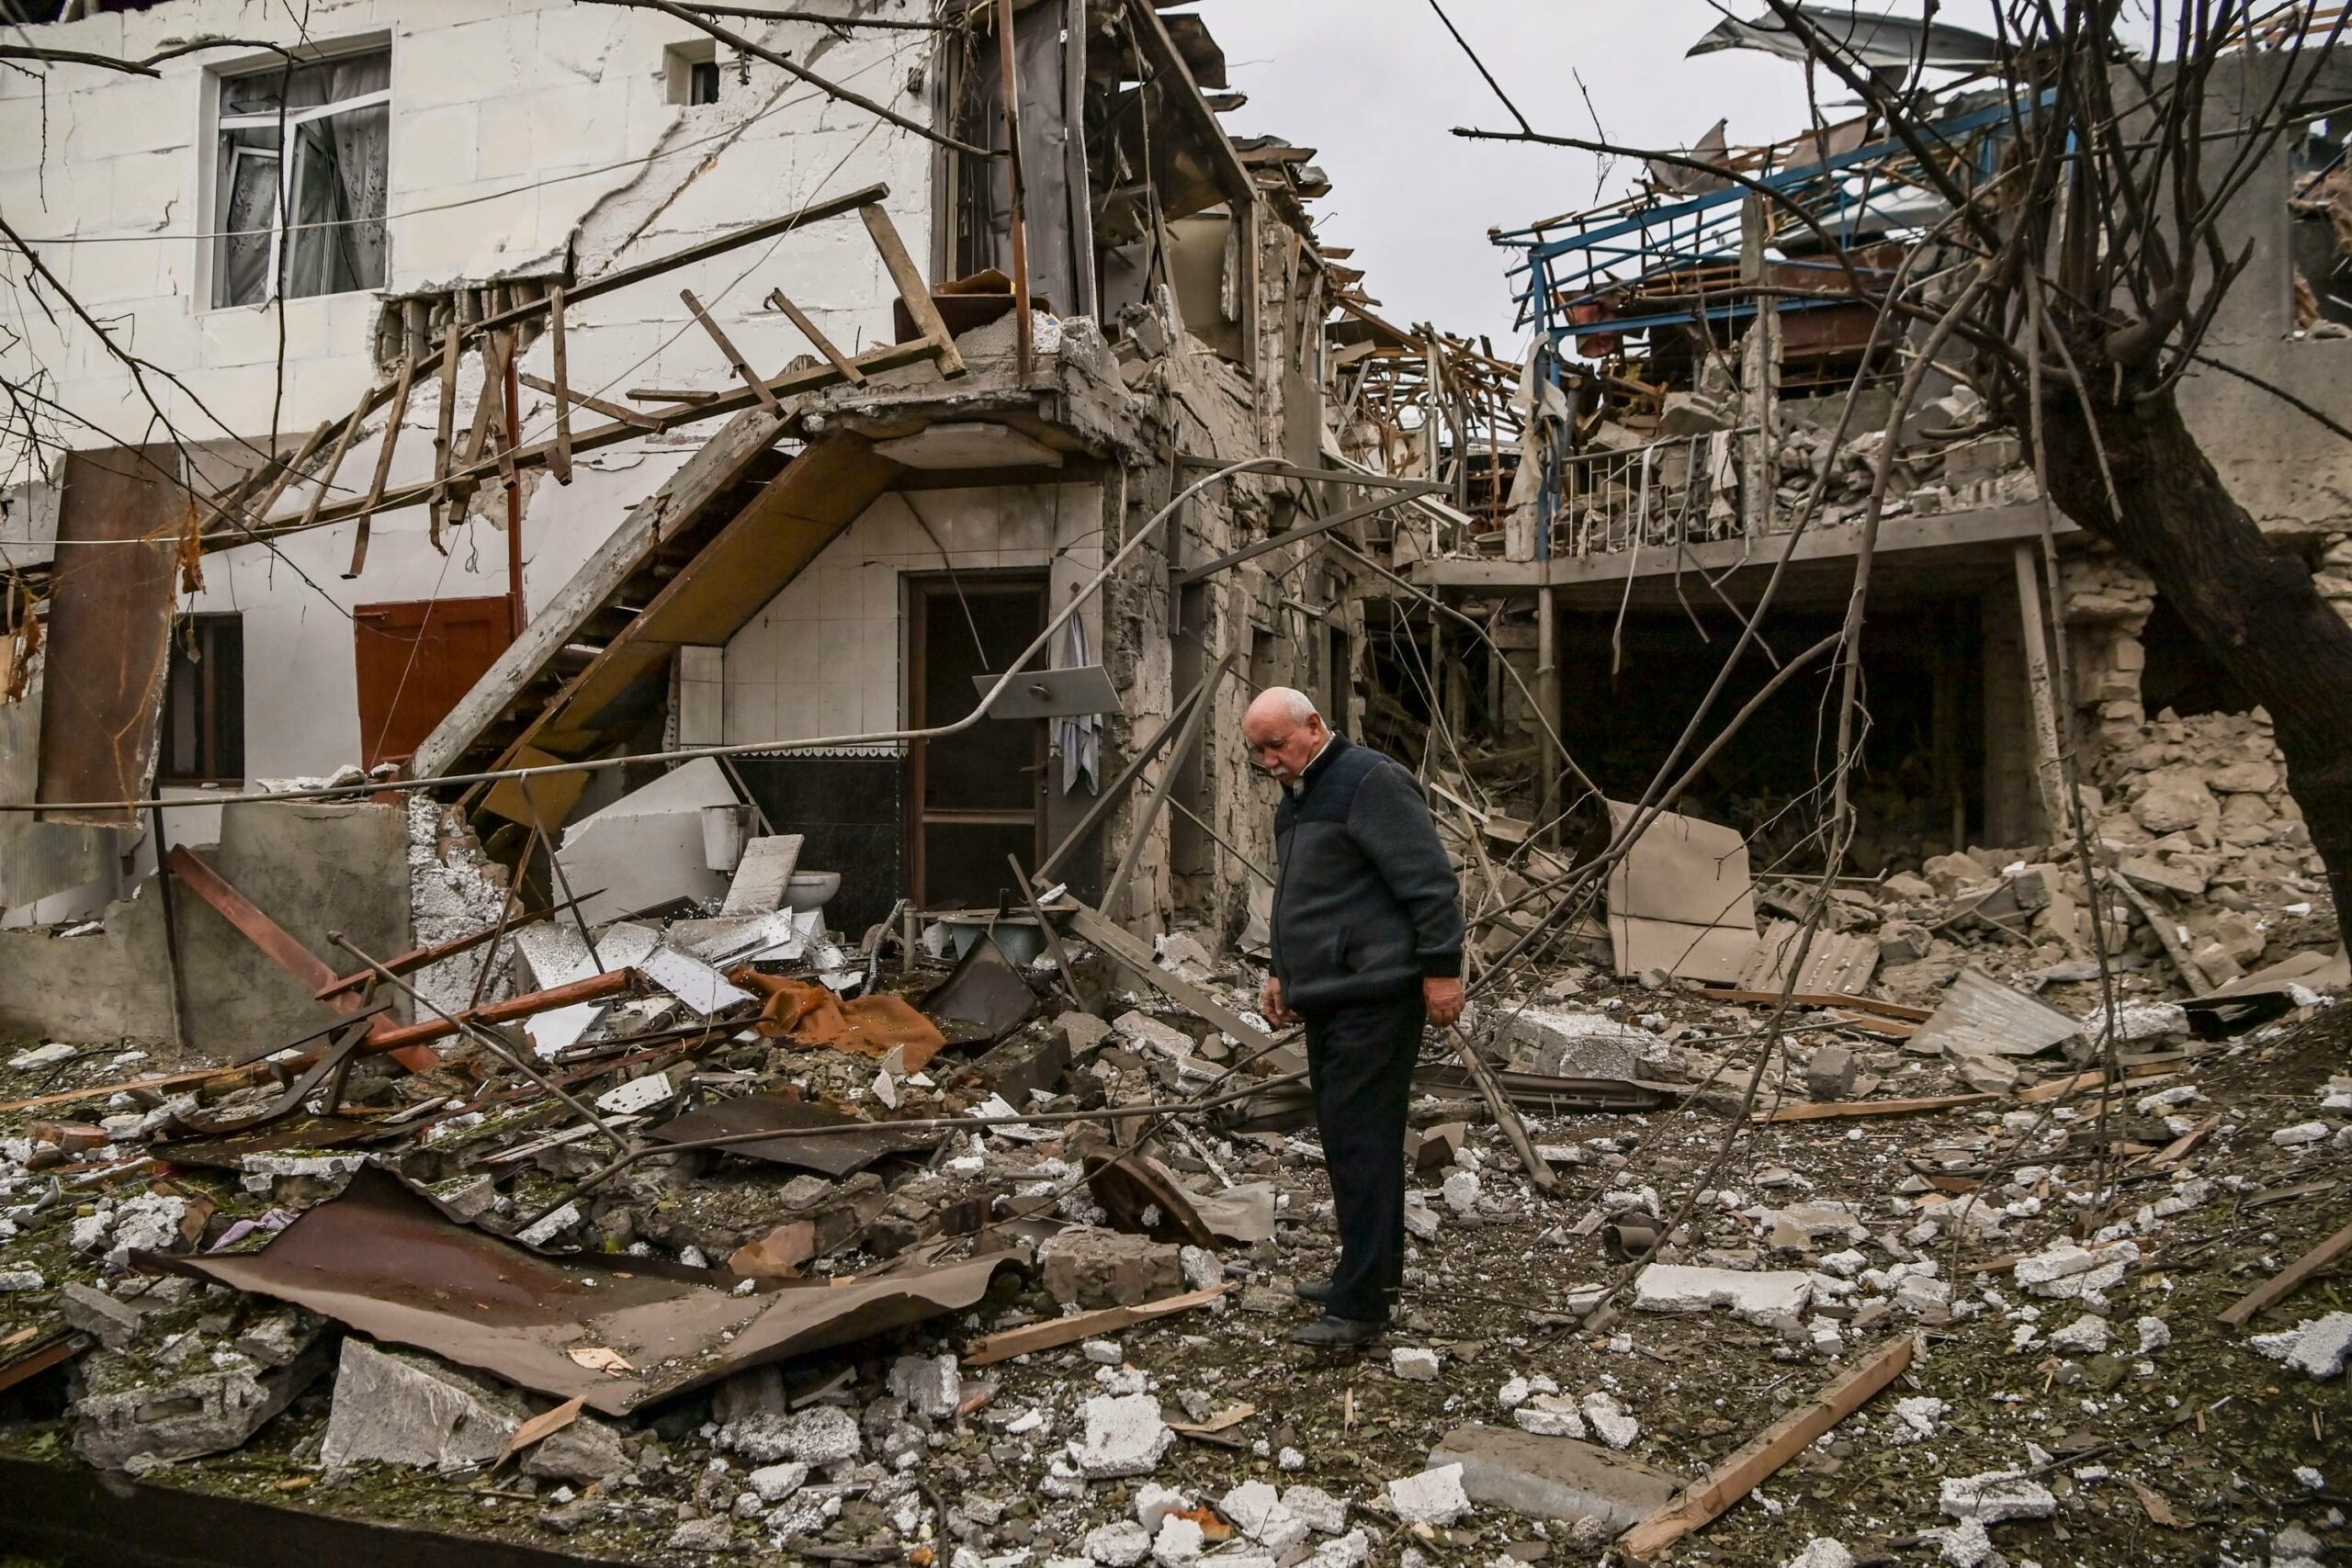 An elderly man stands in front of a destroyed house after shelling in the occupied Nagorno-Karabakh region's main city of Stepanakert.